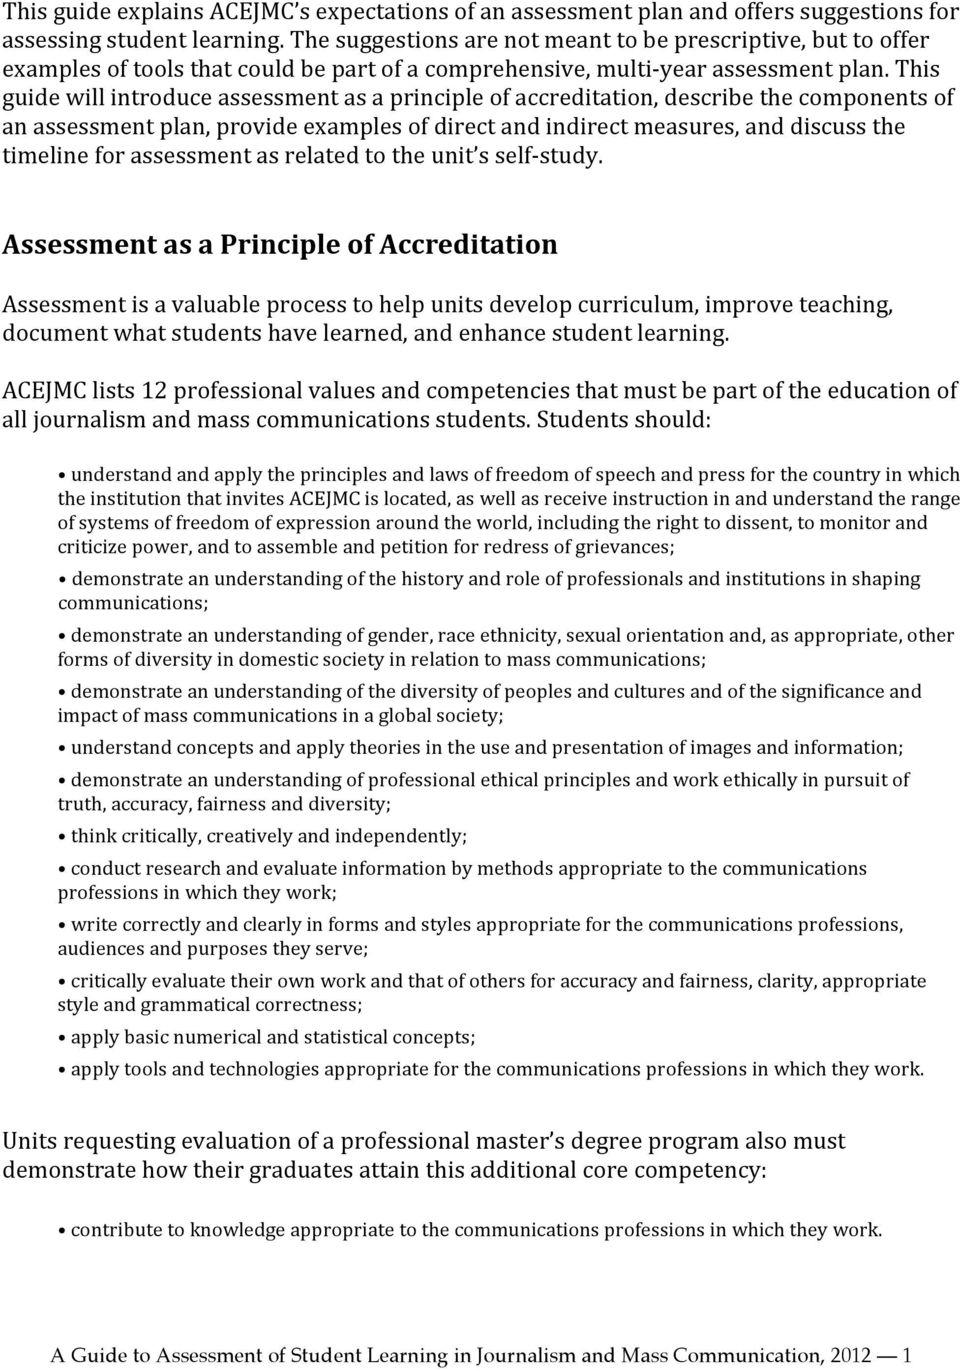 This guide will introduce assessment as a principle of accreditation, describe the components of an assessment plan, provide examples of direct and indirect measures, and discuss the timeline for